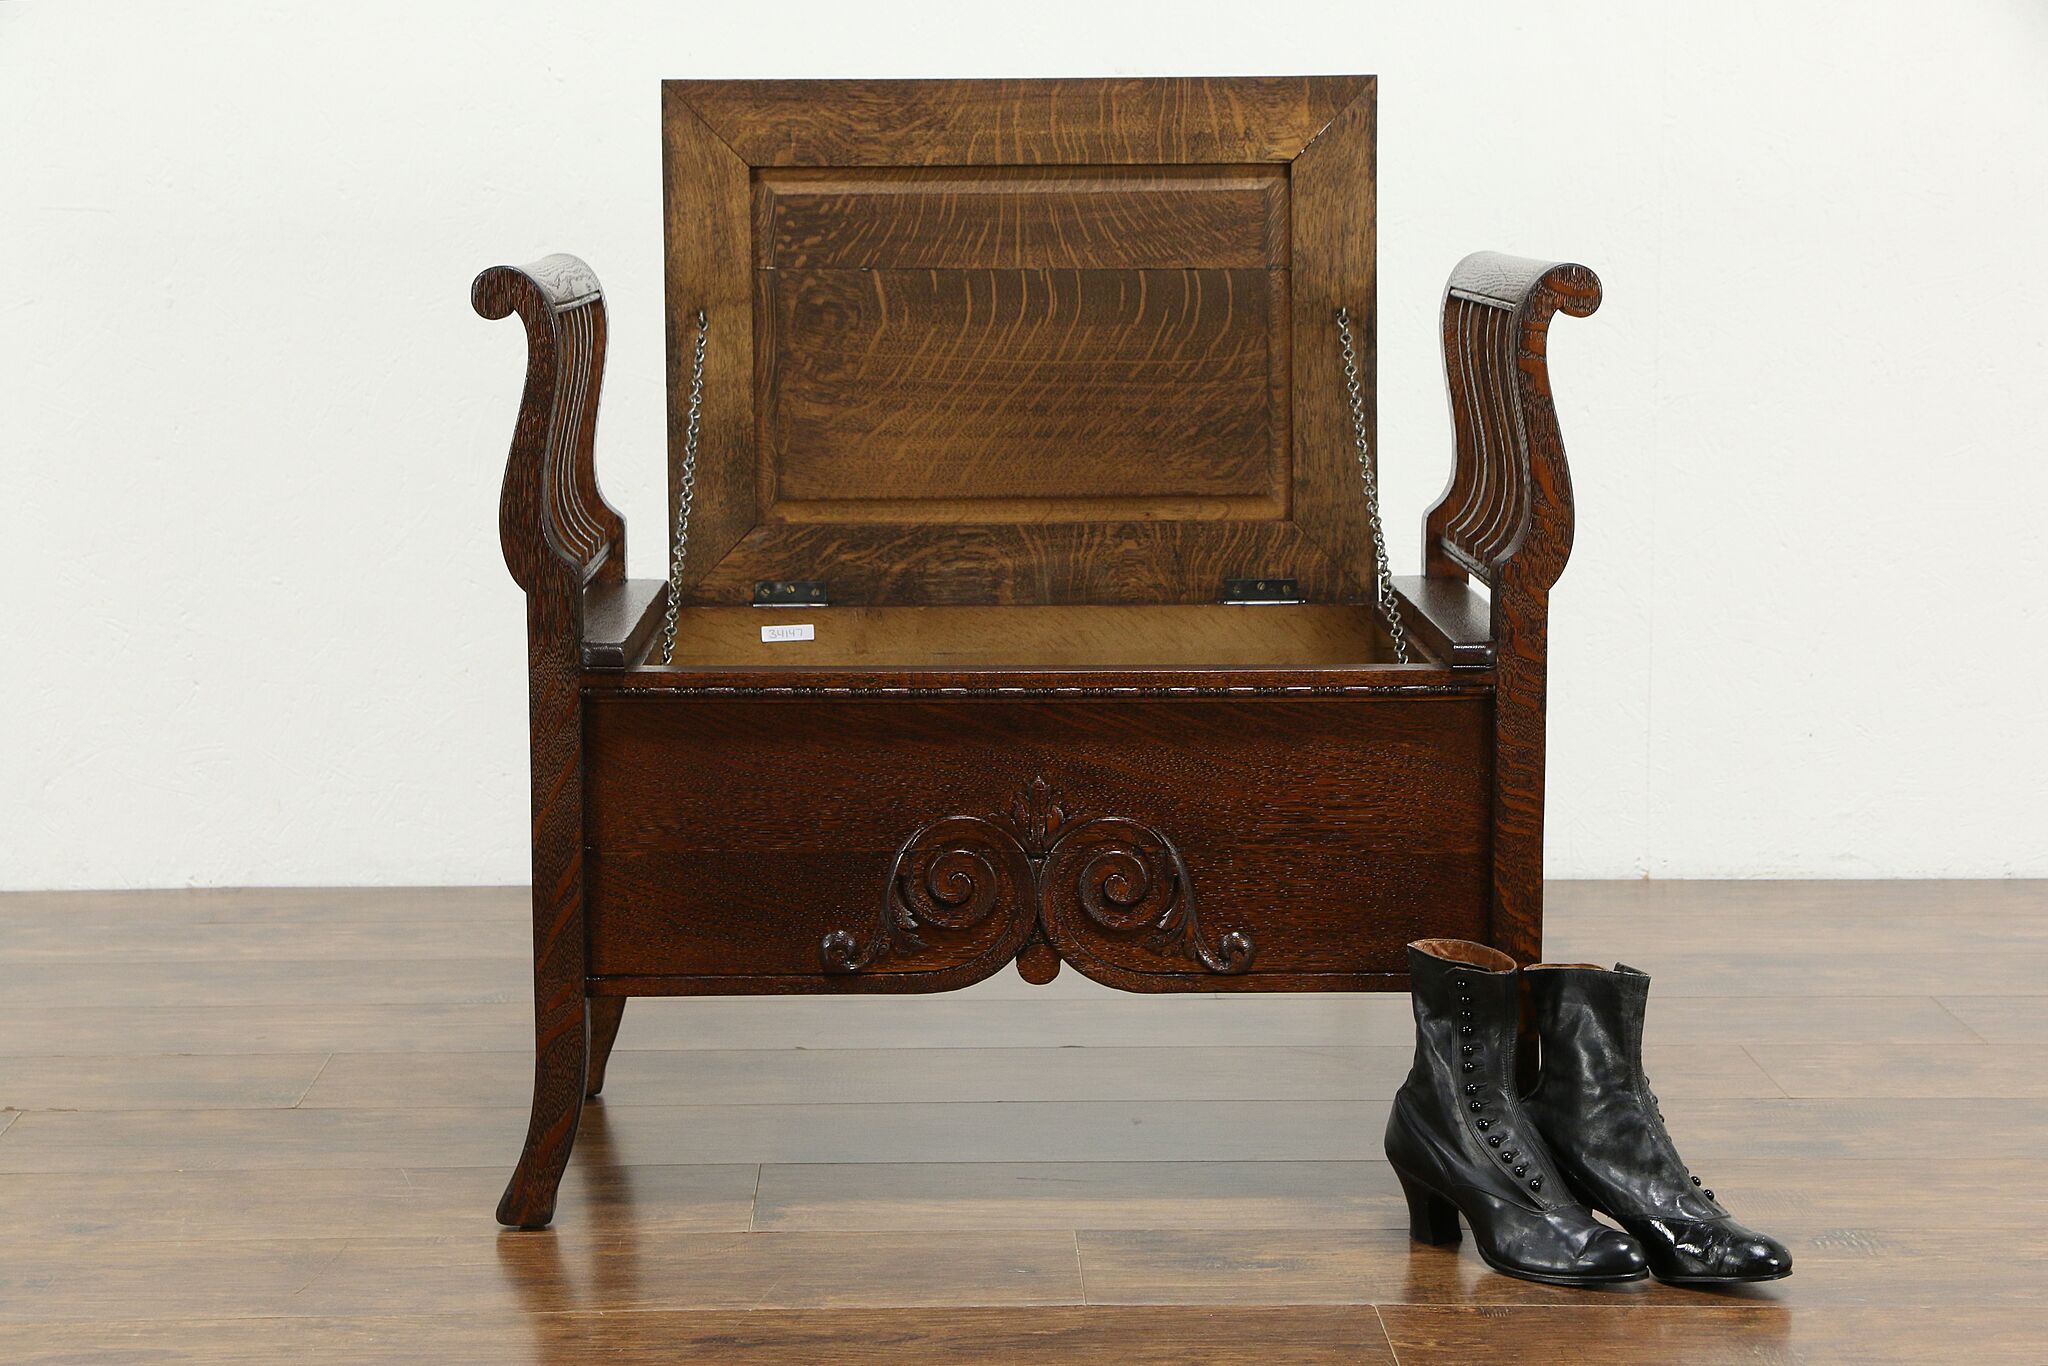 Details about   antique oak hall seat quarter saw original finish beautiful patina and carving  